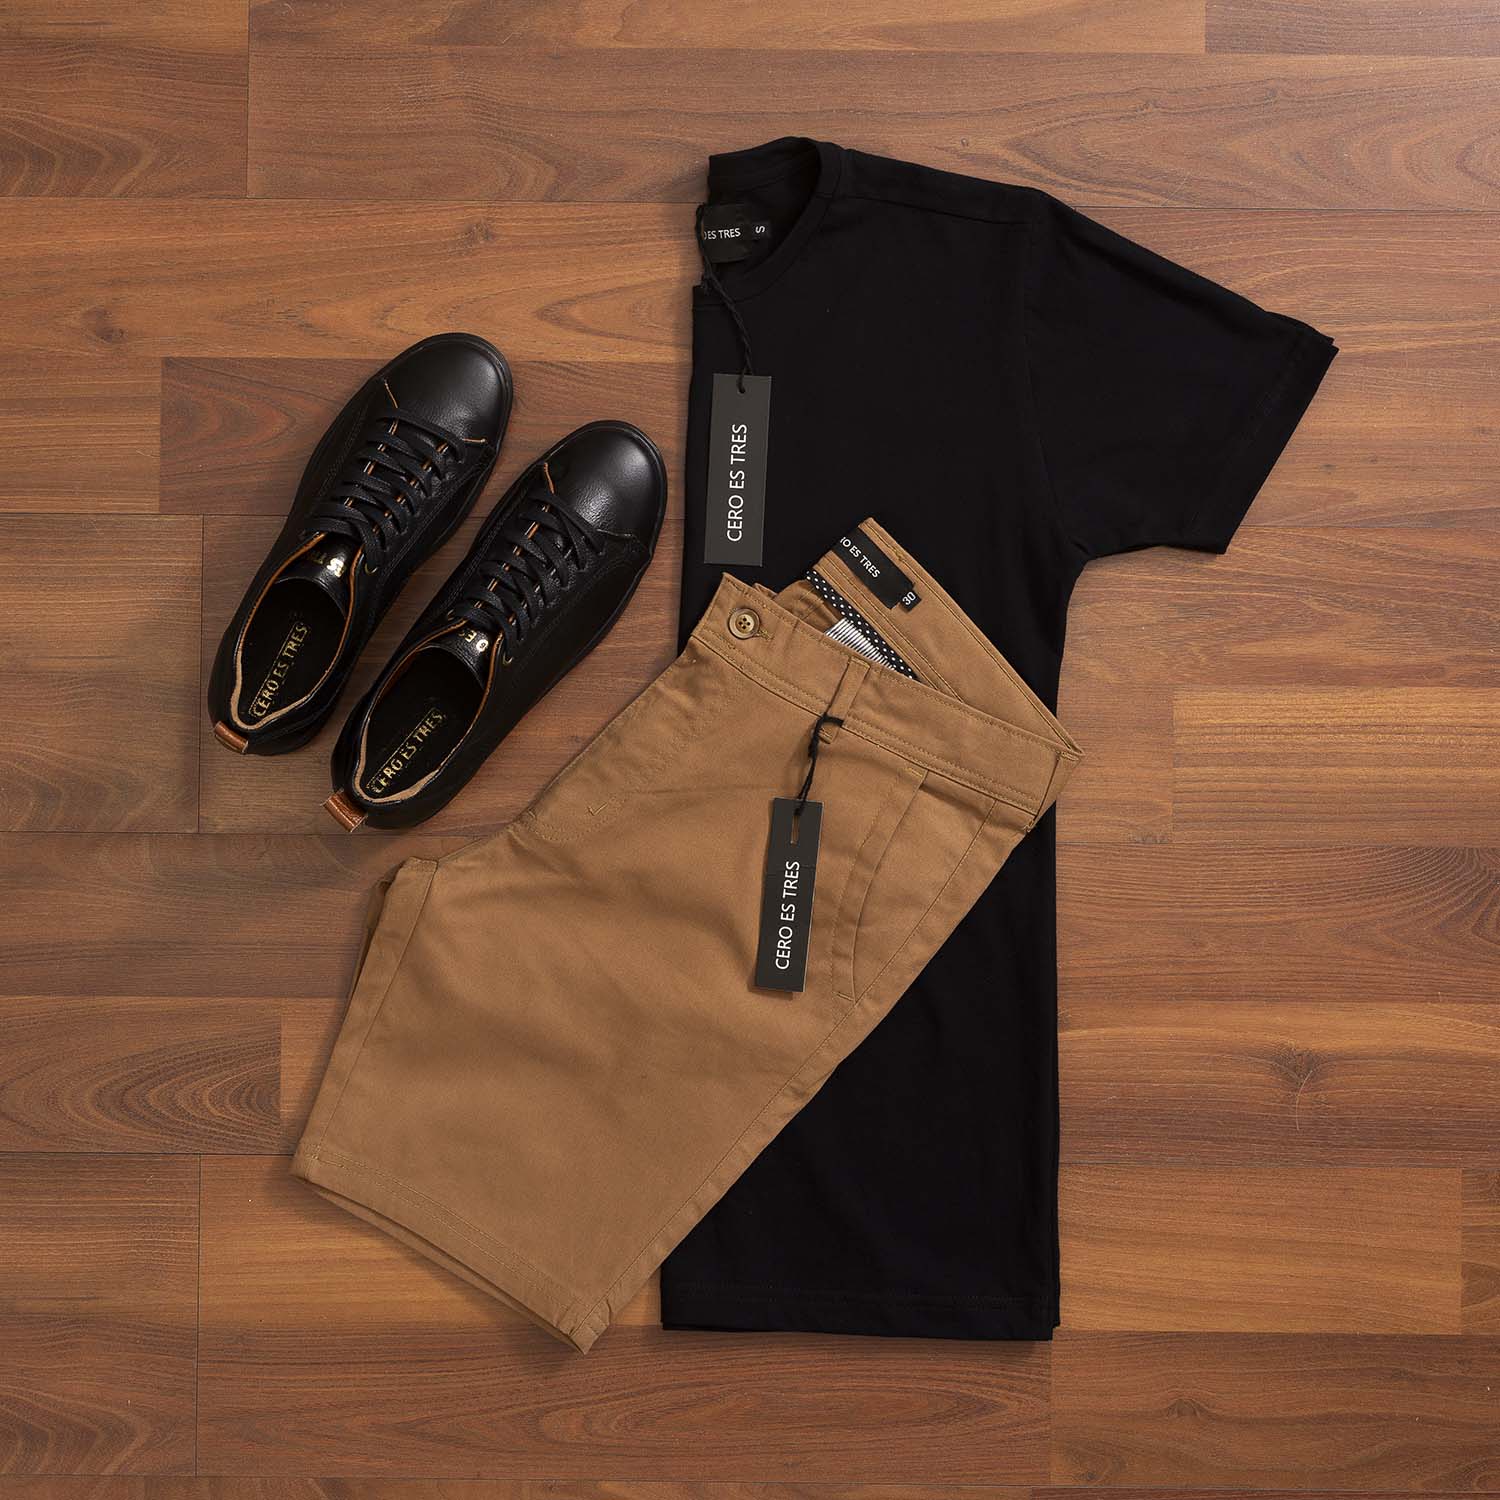 OUTFIT CERO 458